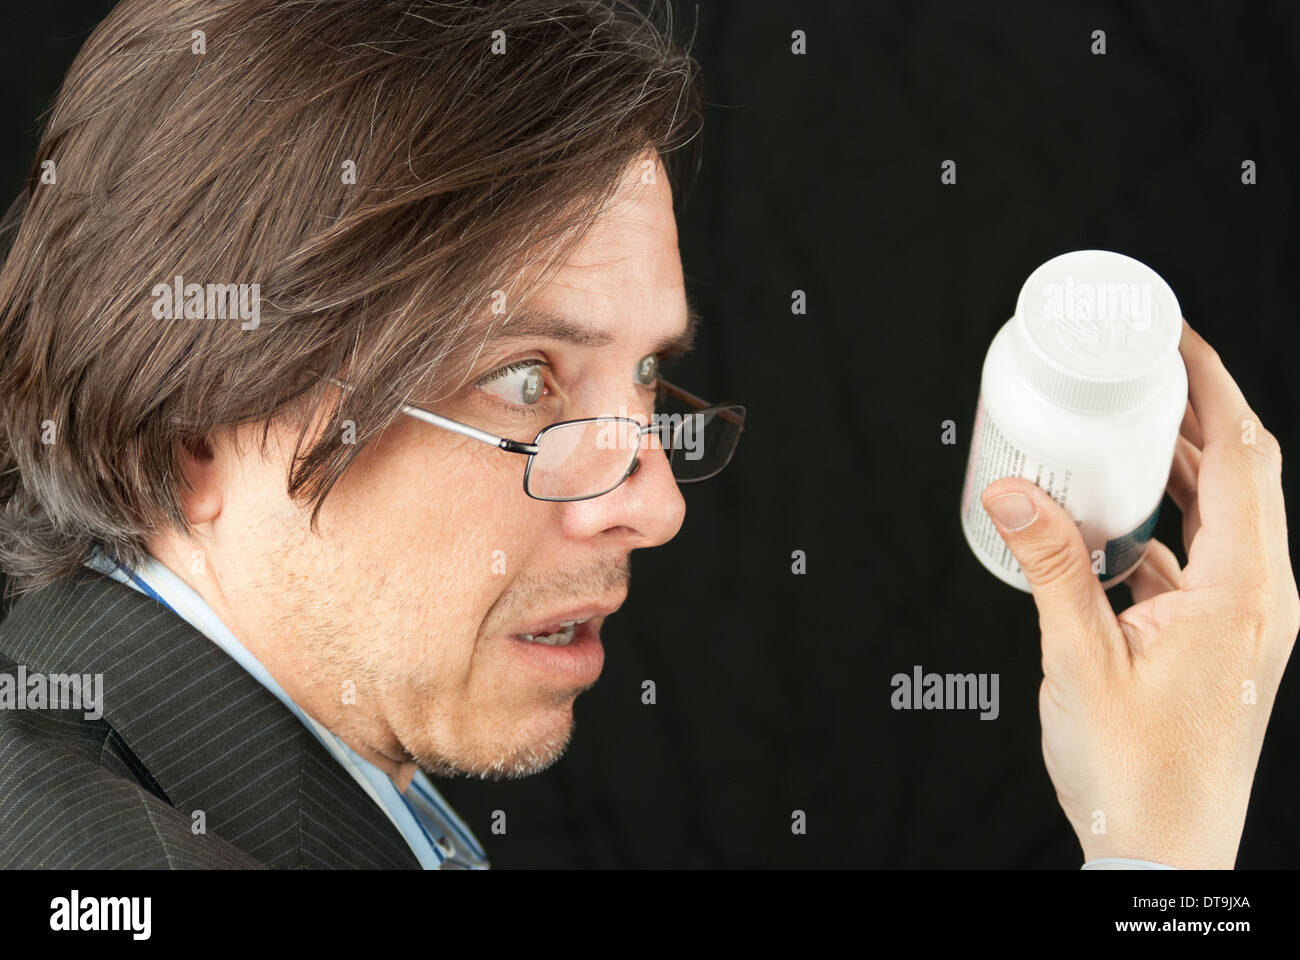 Close-up of a casual businessman looking over glasses trying to read a pill bottle label. Stock Photo